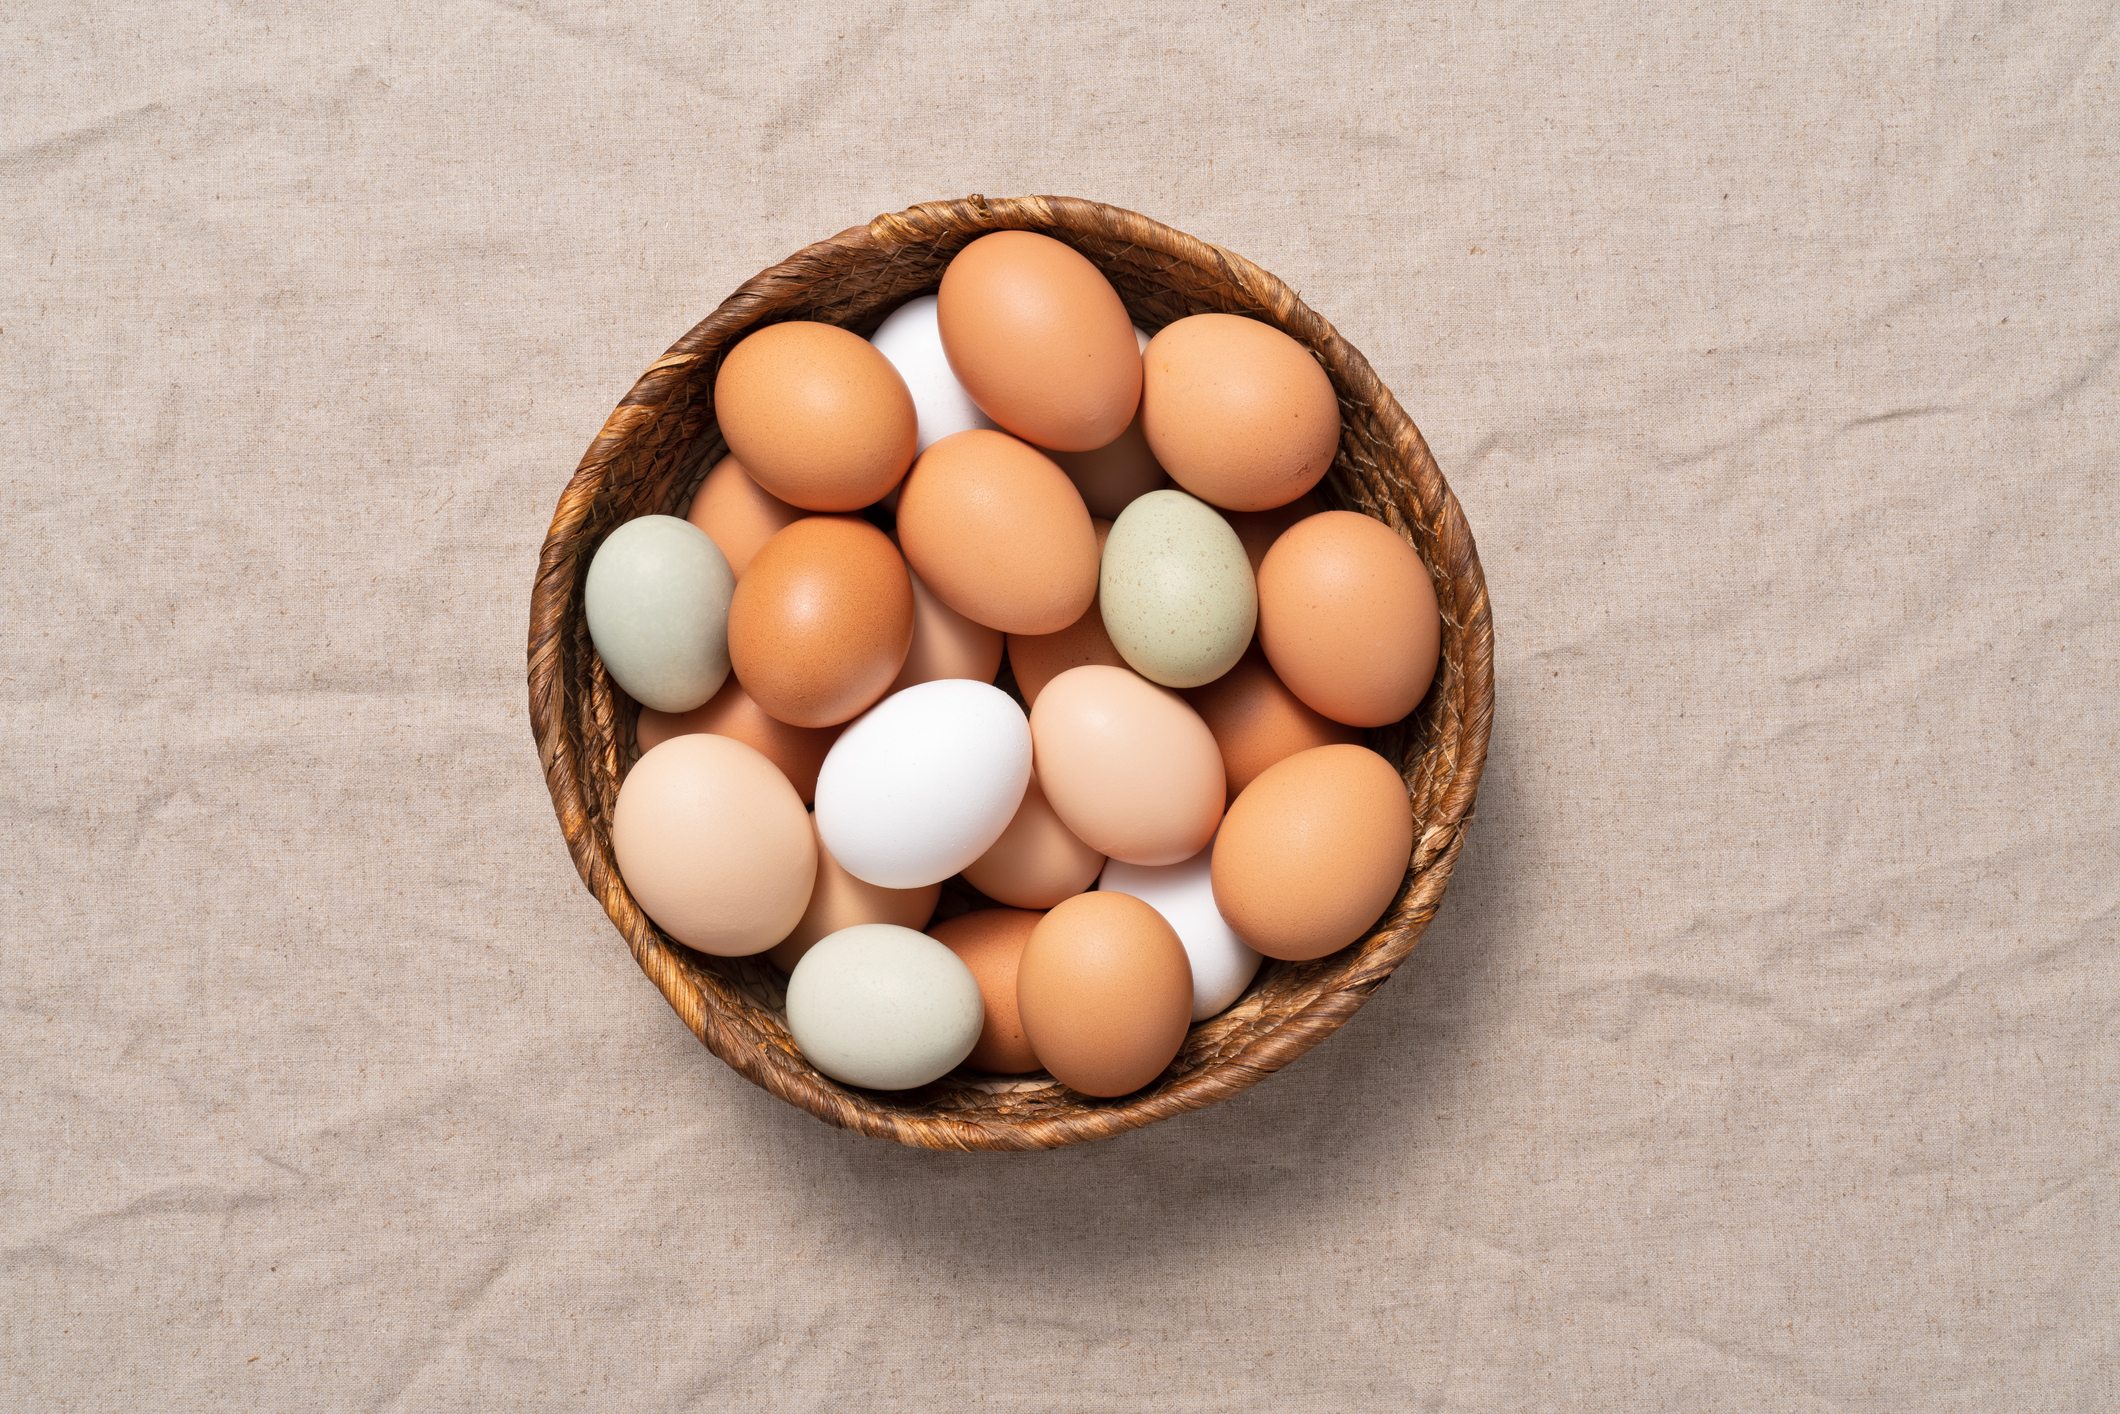 Multi Colored Chicken Eggs in a Basket on Beige Colored Linen Tablecloth.